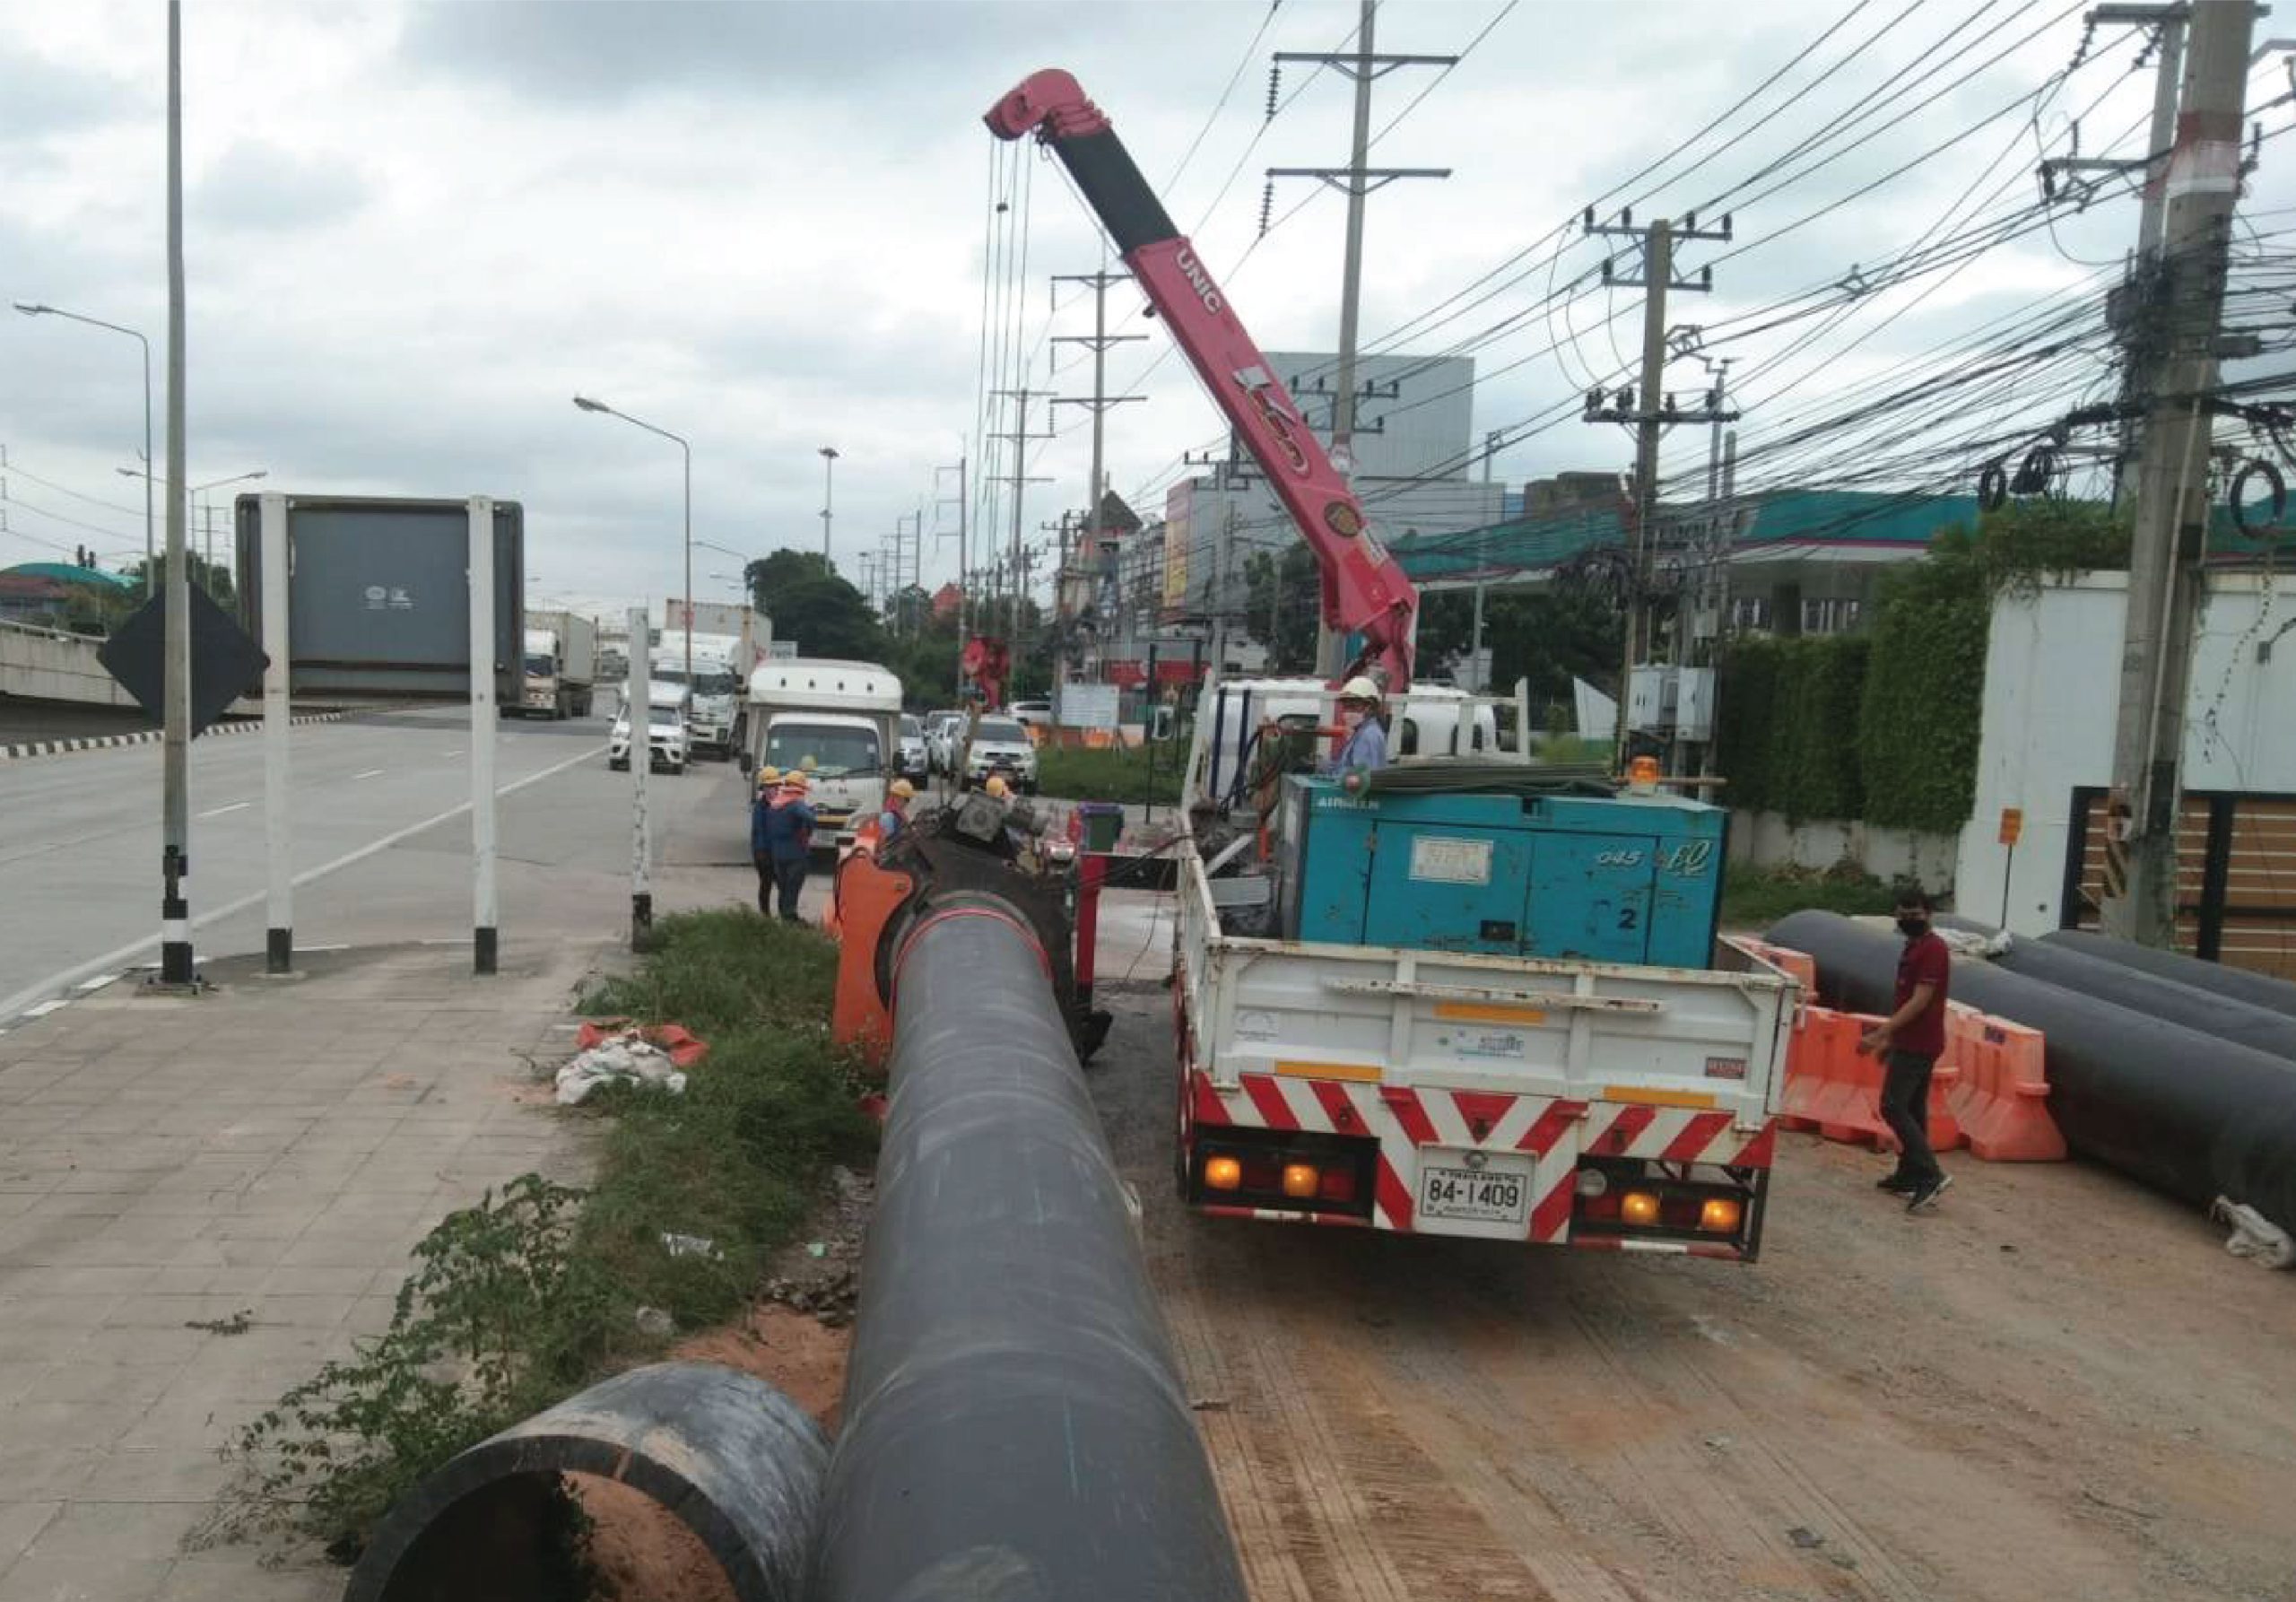 Engineers using a jaw crane to install HDPE pipes in a trench installation at Thaioil plant.